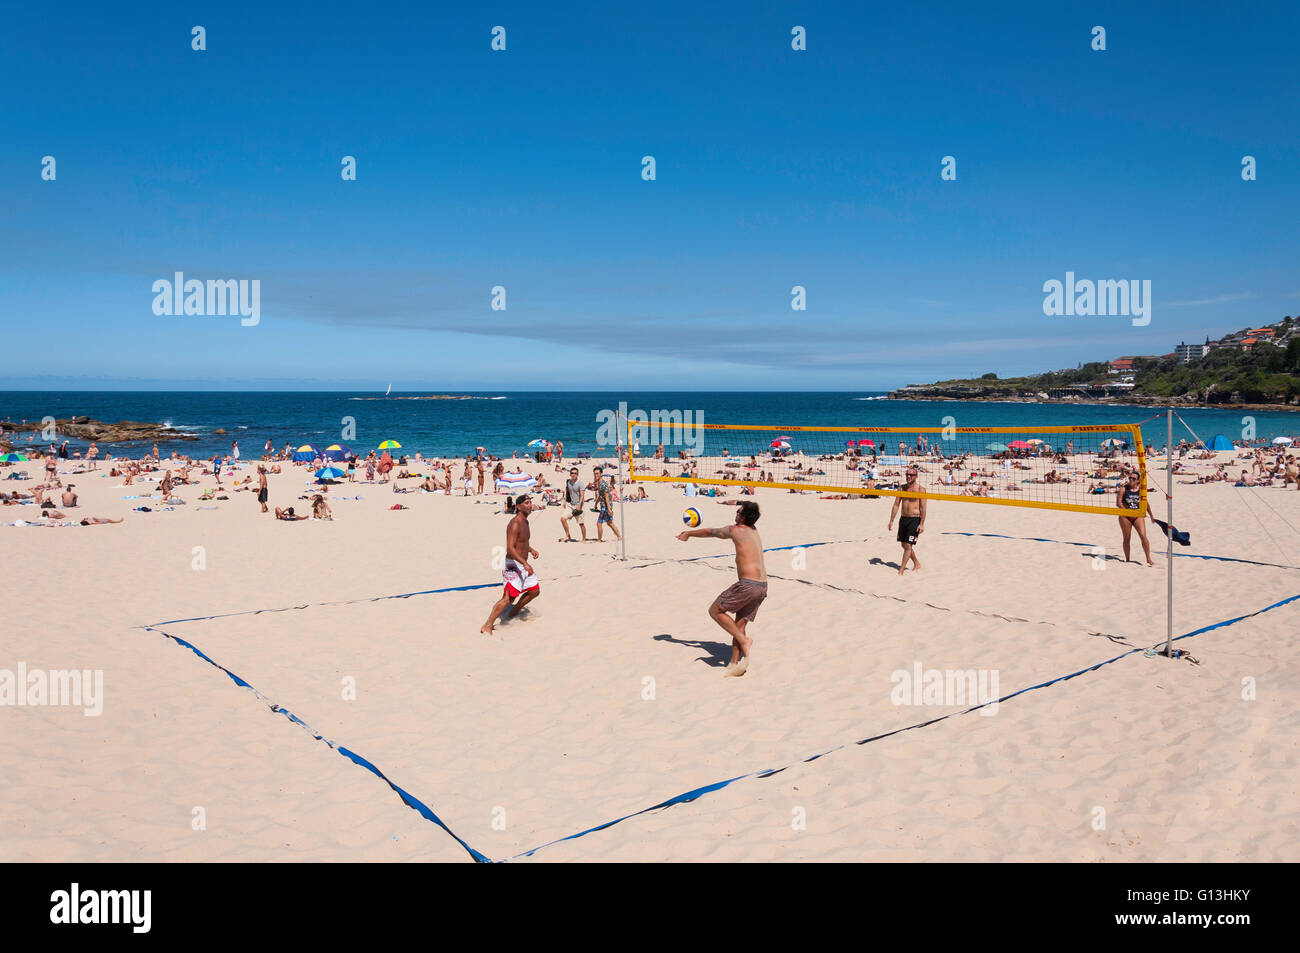 Men playing beach volleyball on Coogee Beach, Coogee, Sydney, New South Wales, Australia Stock Photo